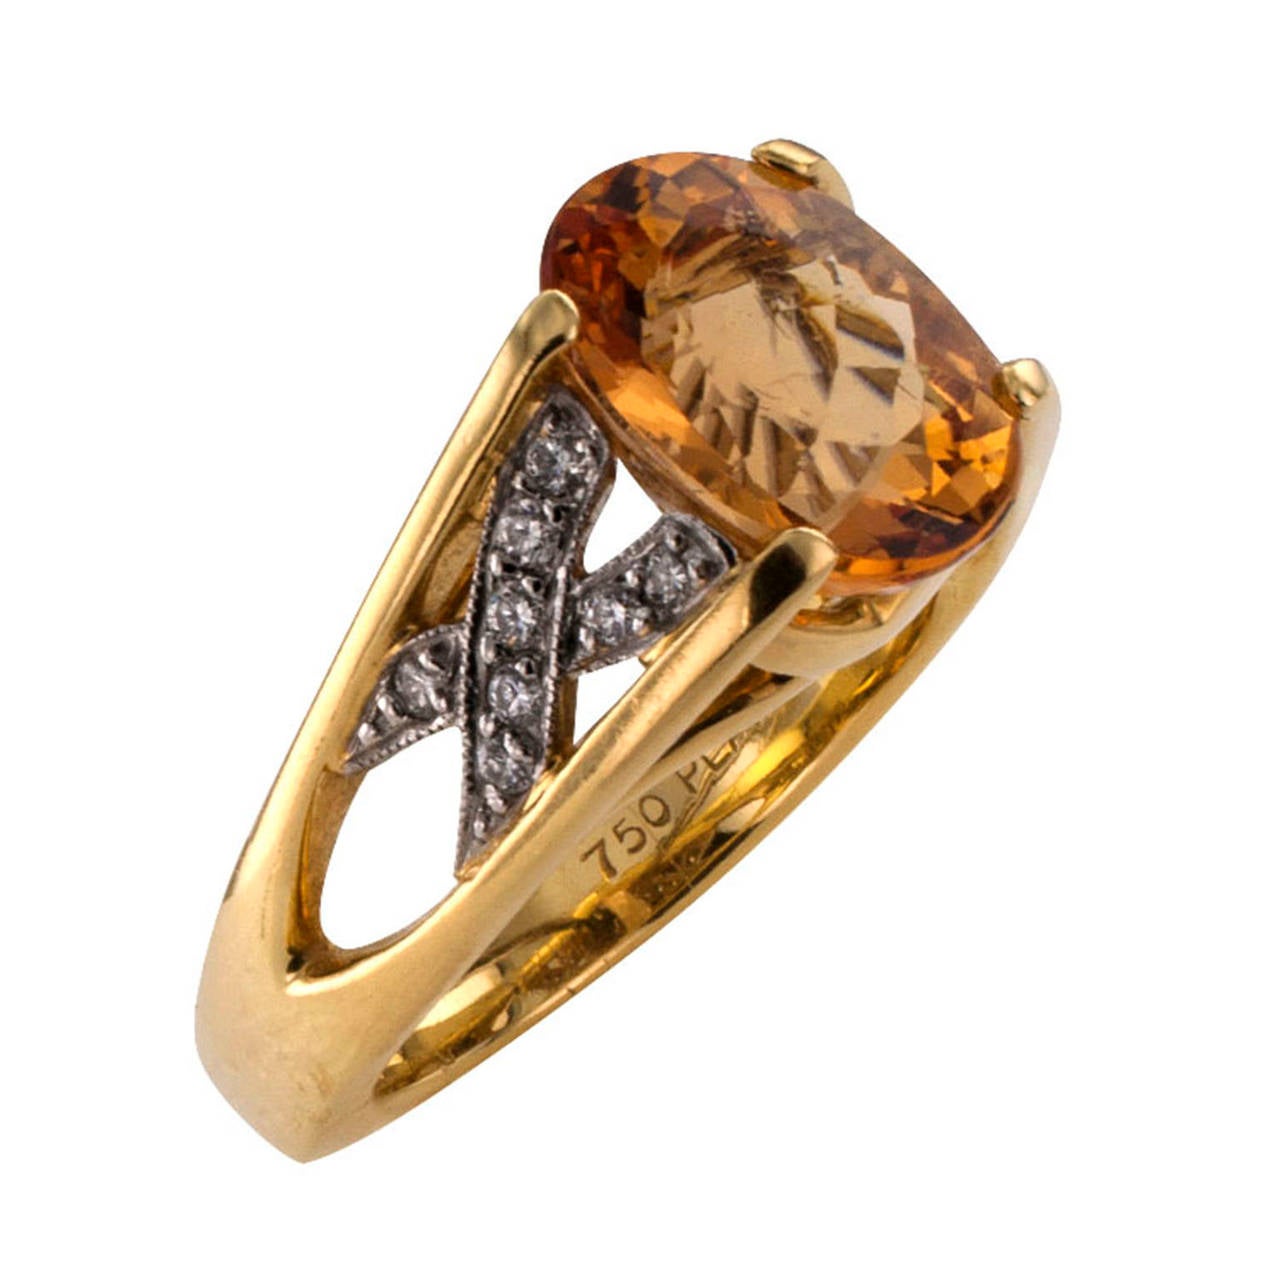 Circa 1990, this eye-catching contemporary ring centers upon a very pretty oval imperial topaz weighing approximately 4.75 carats, platinum X shaped motifs set with diamonds totaling approximately 0.33 carat decorate the angular split shank, mounted